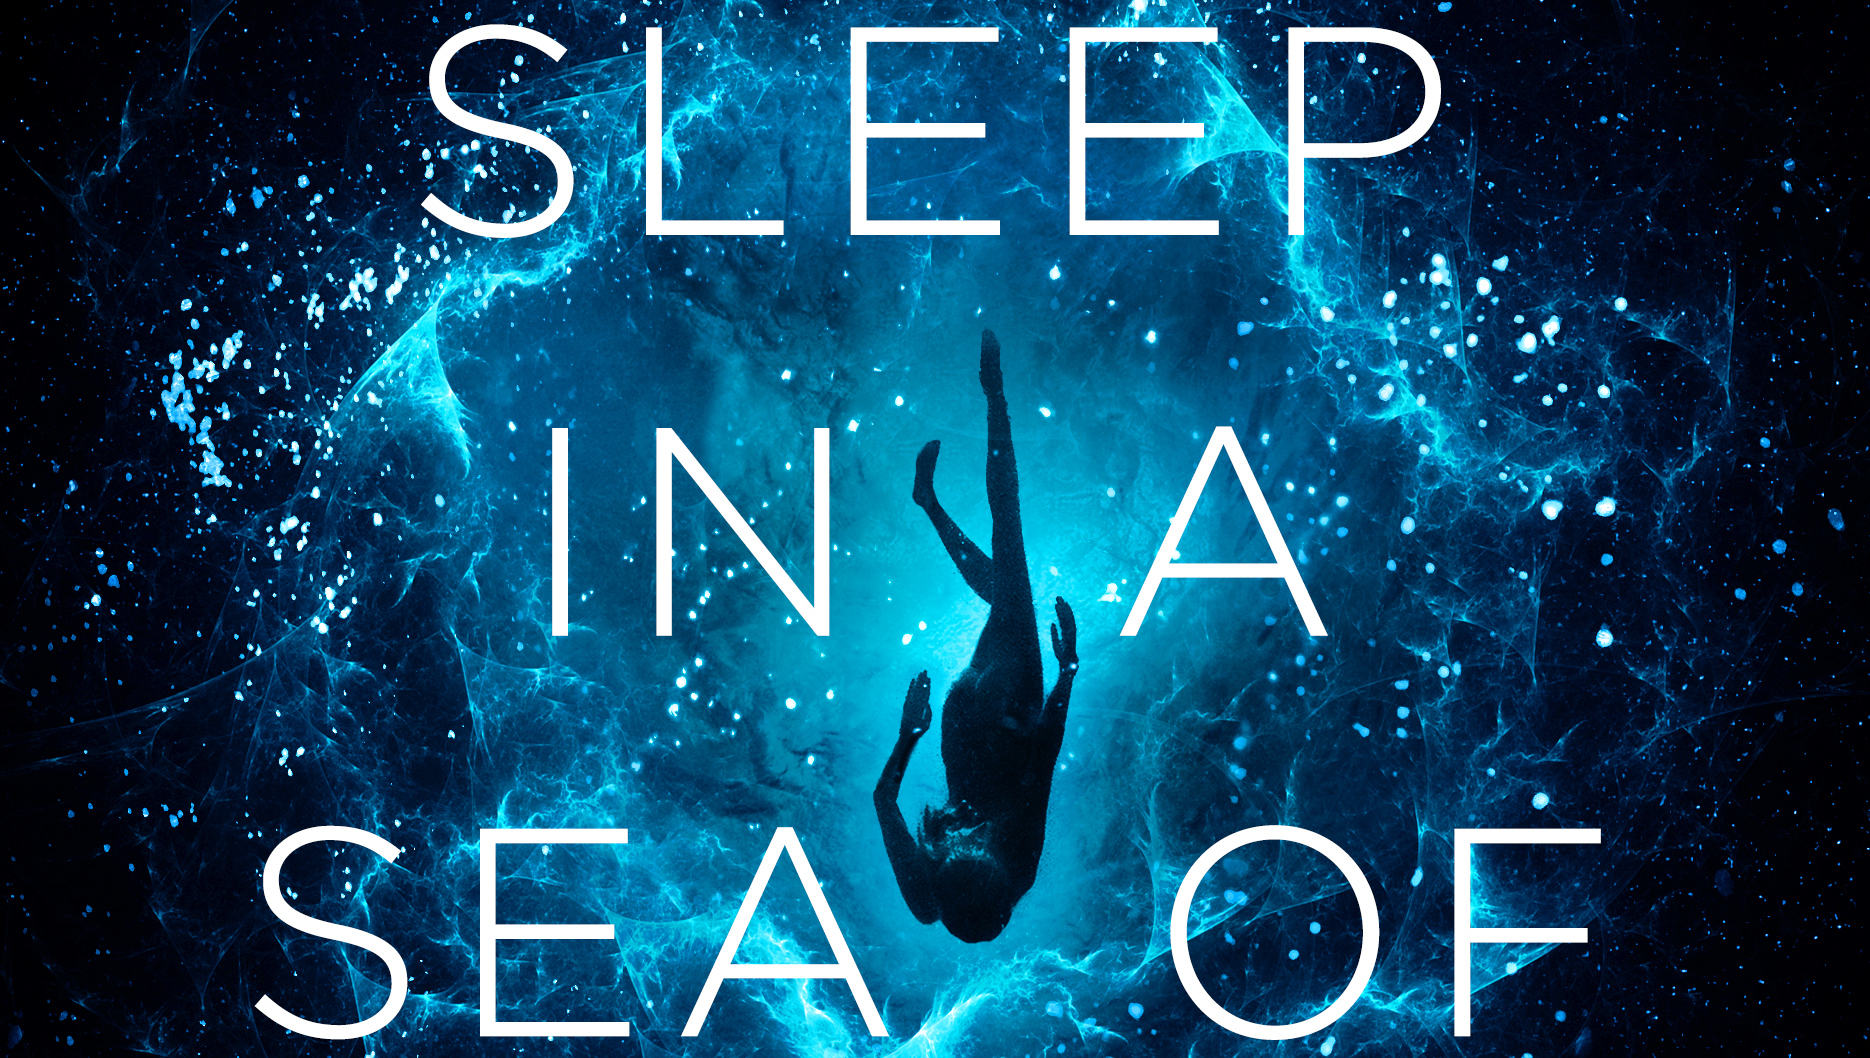 to sleep in a sea of stars sequel